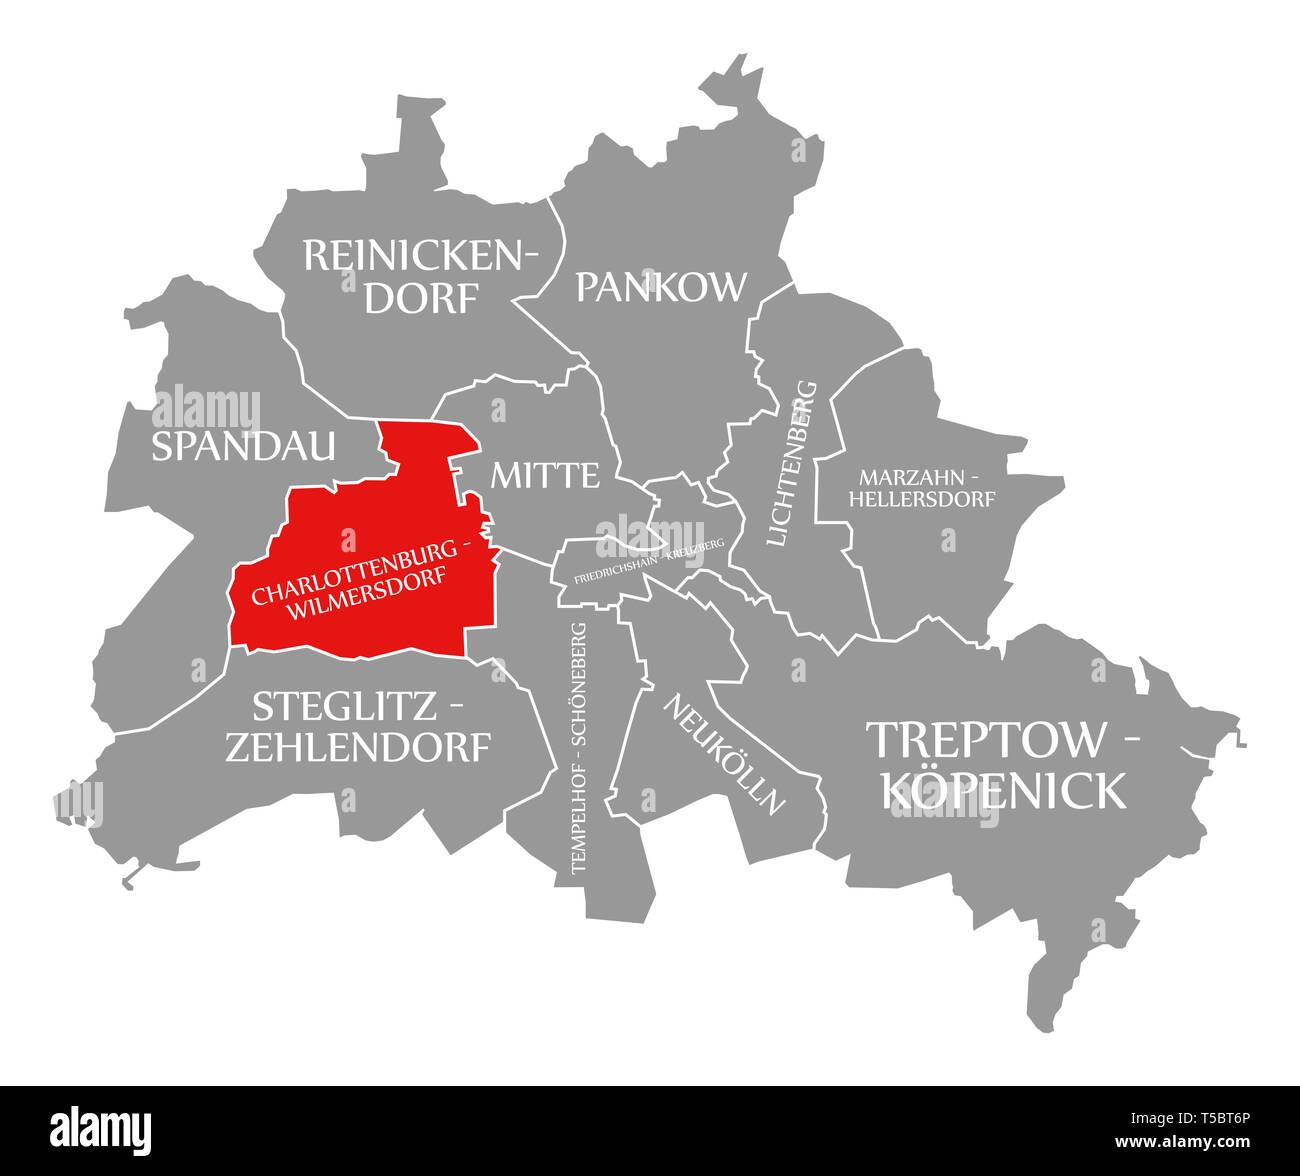 Charlottenburg-Wilmersdorf city district red highlighted in map of Berlin Germany Stock Photo